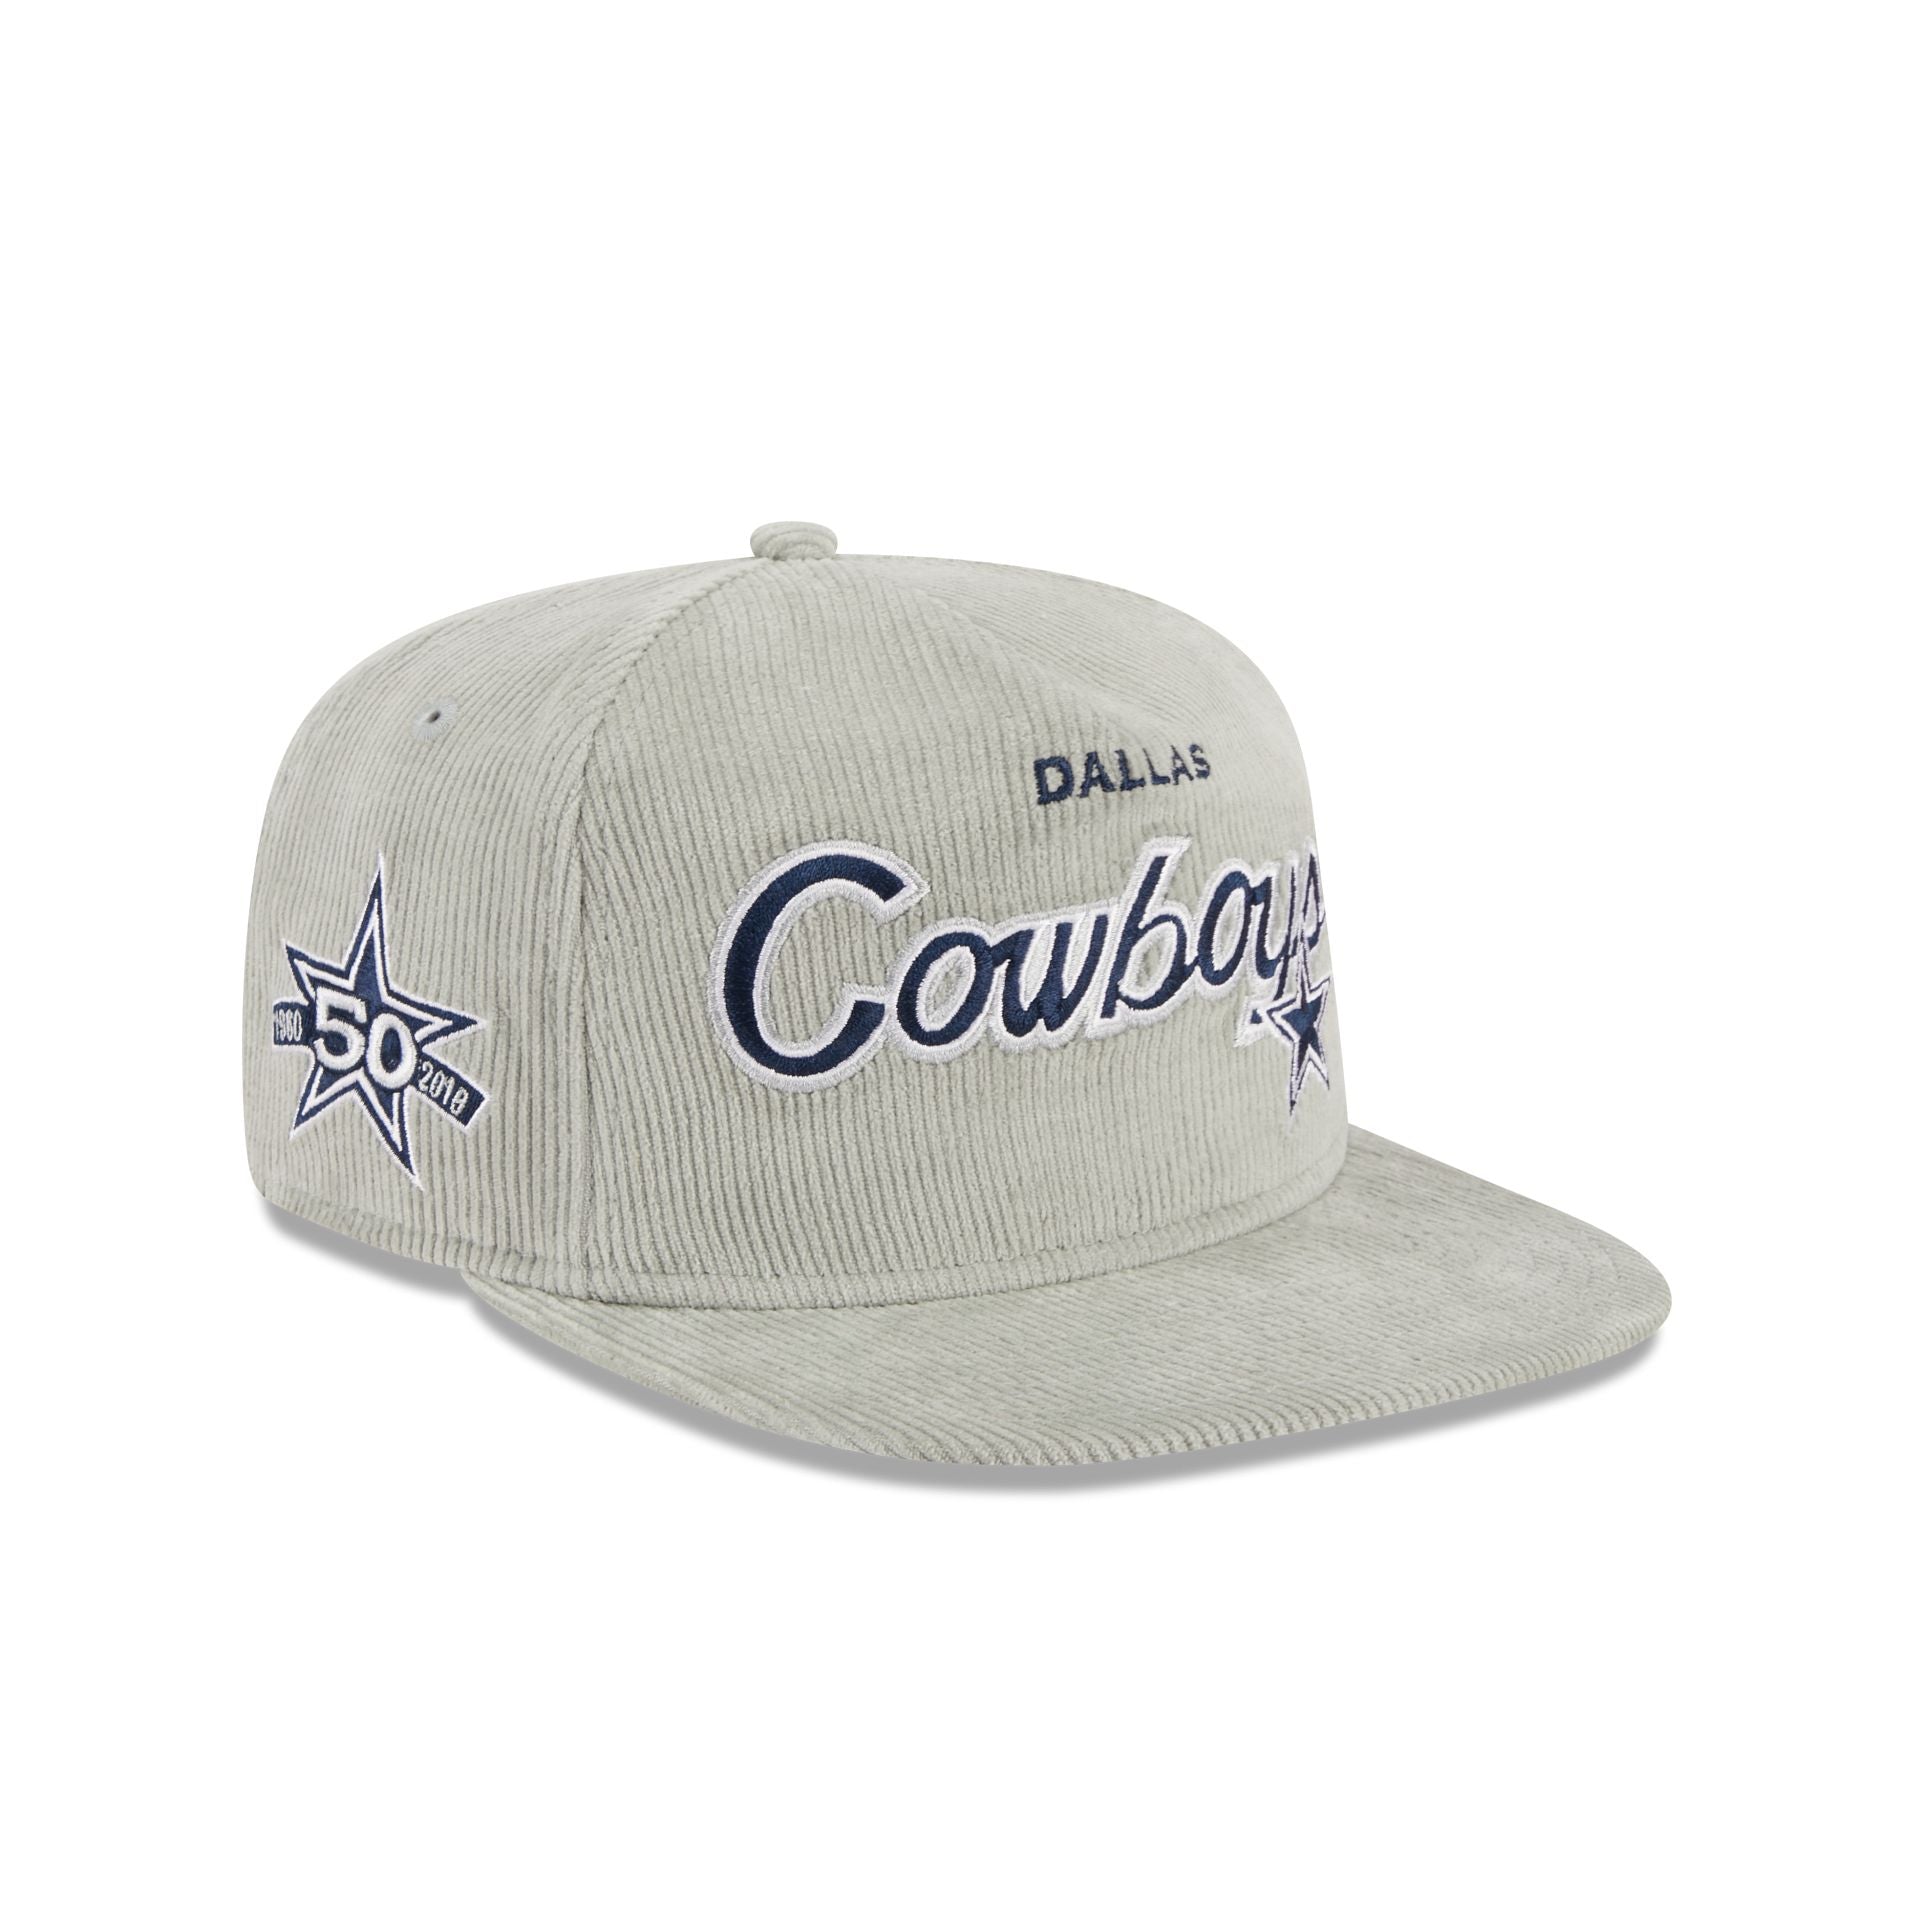 Mitchell & Ness, Accessories, Mitchell Ness Vintage Cowboys Hat